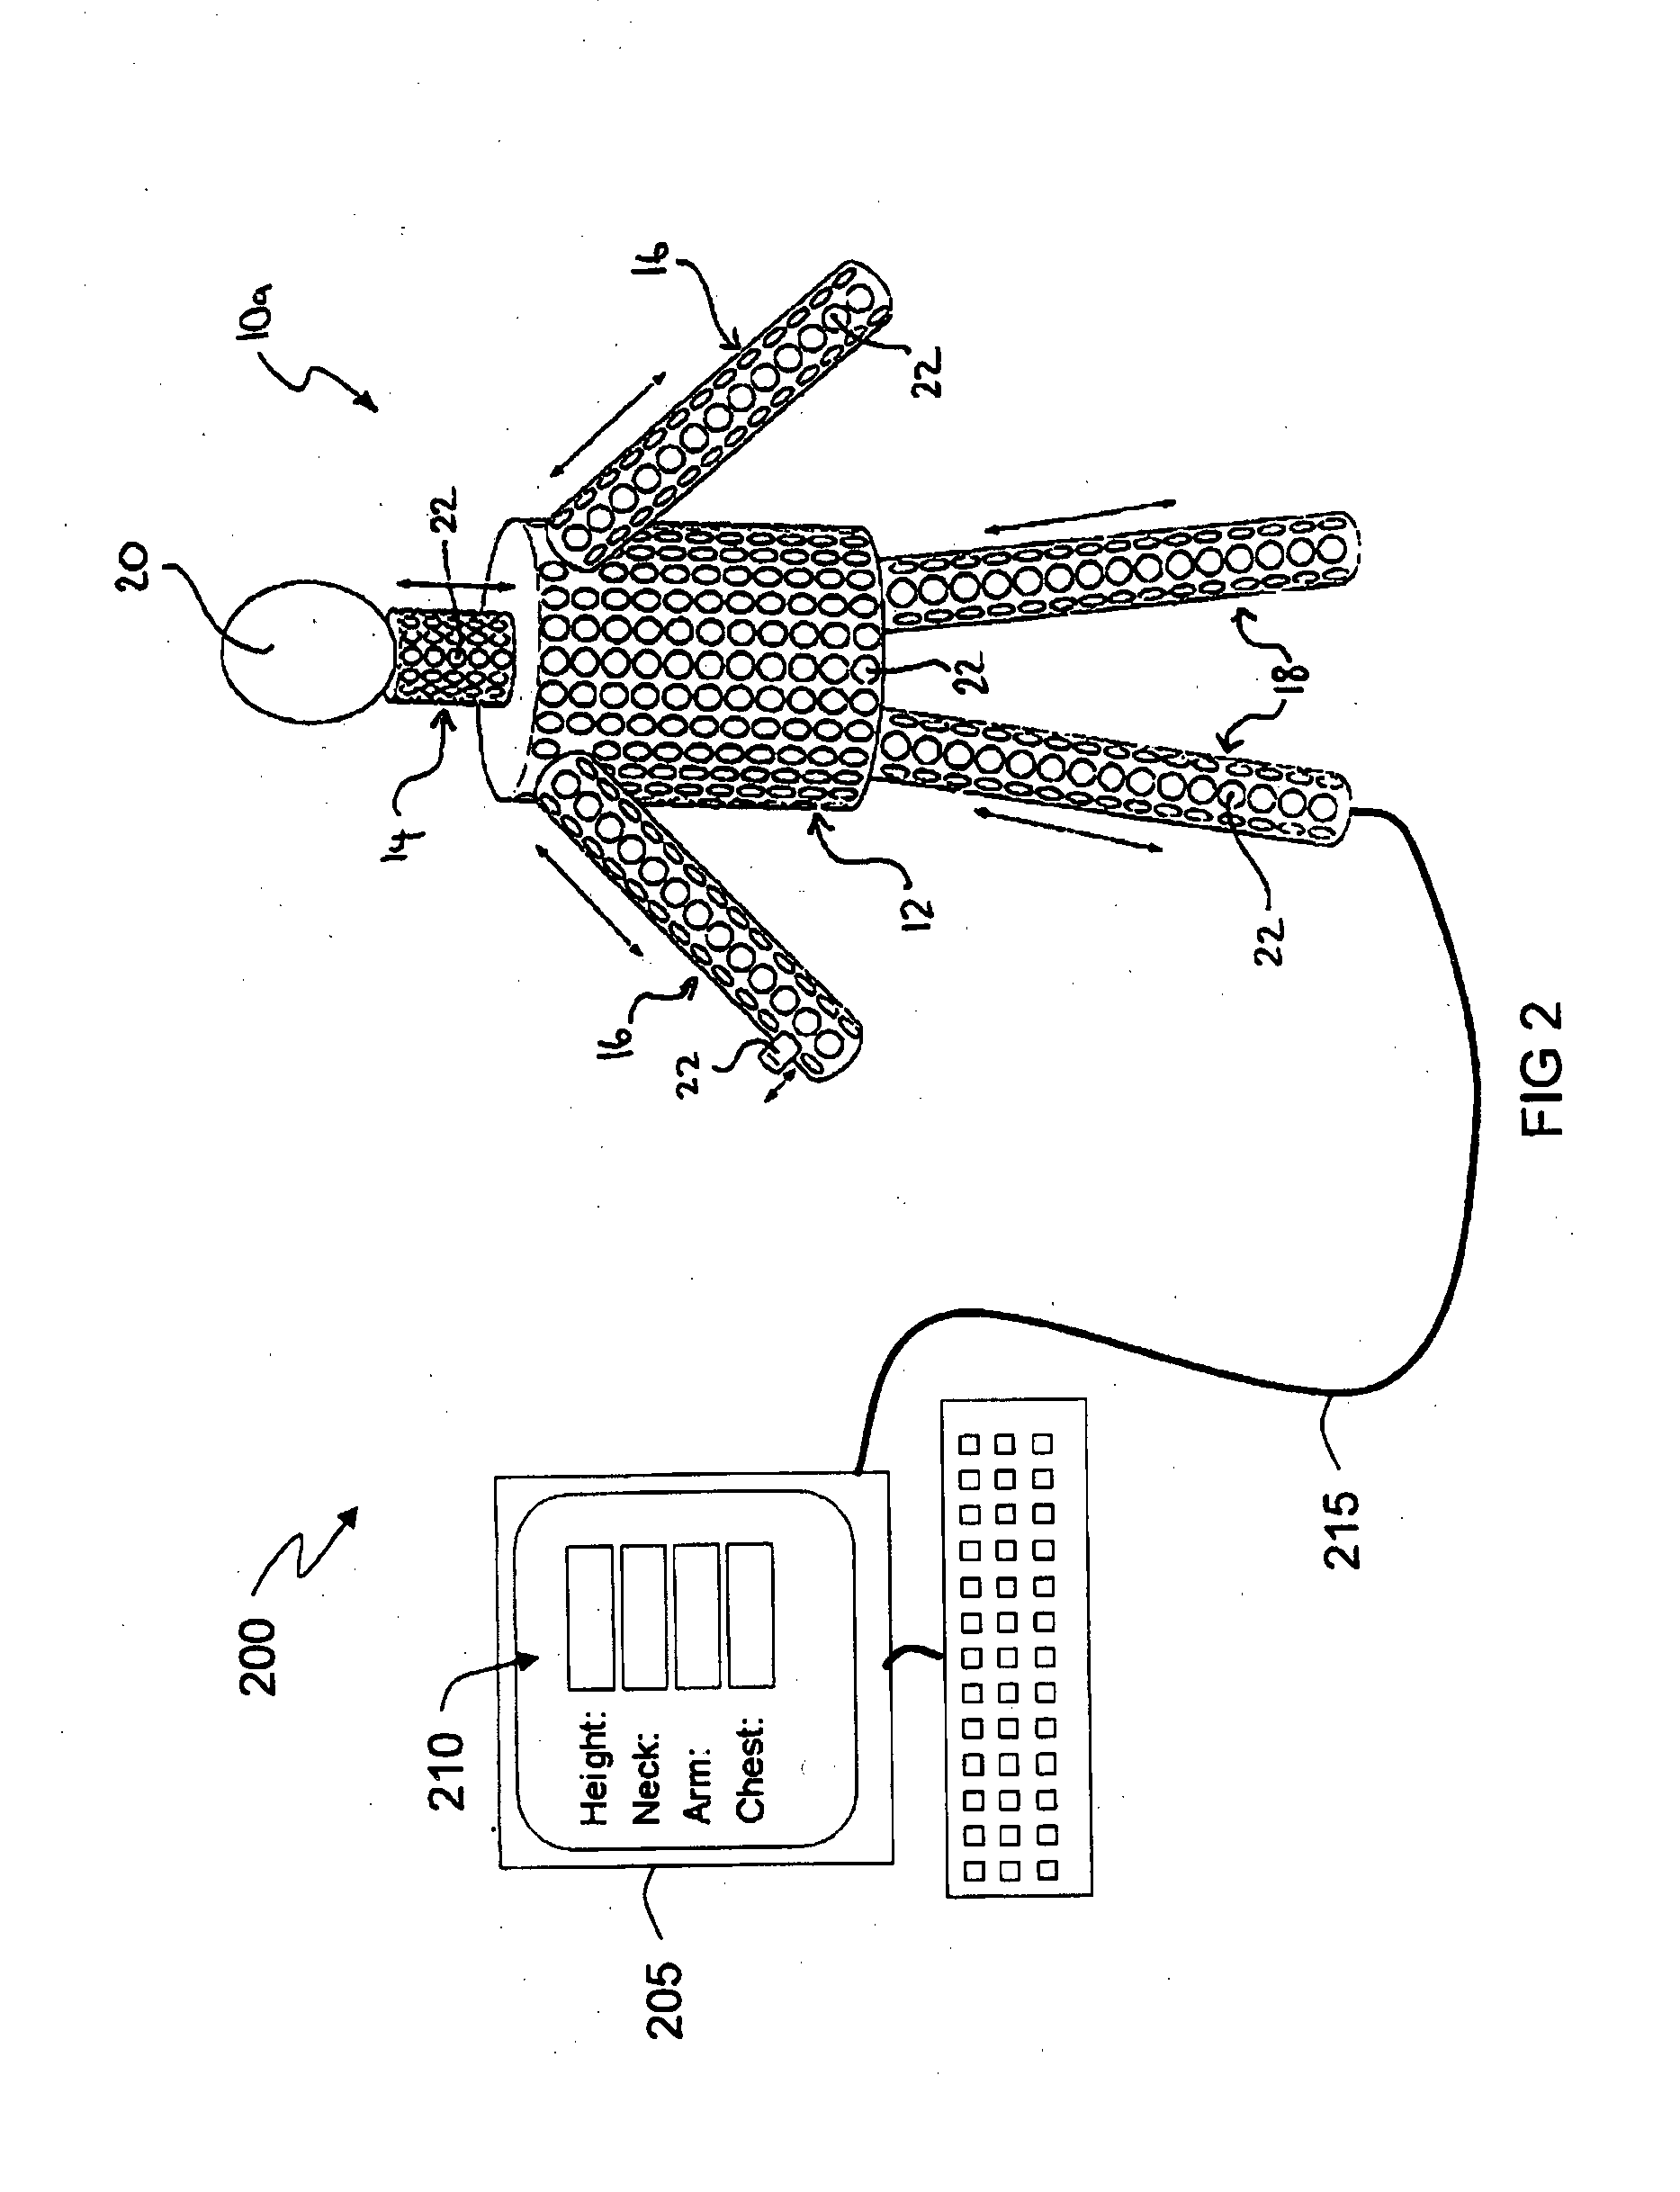 Mannequin, method and system for purchase, making and alteration of clothing